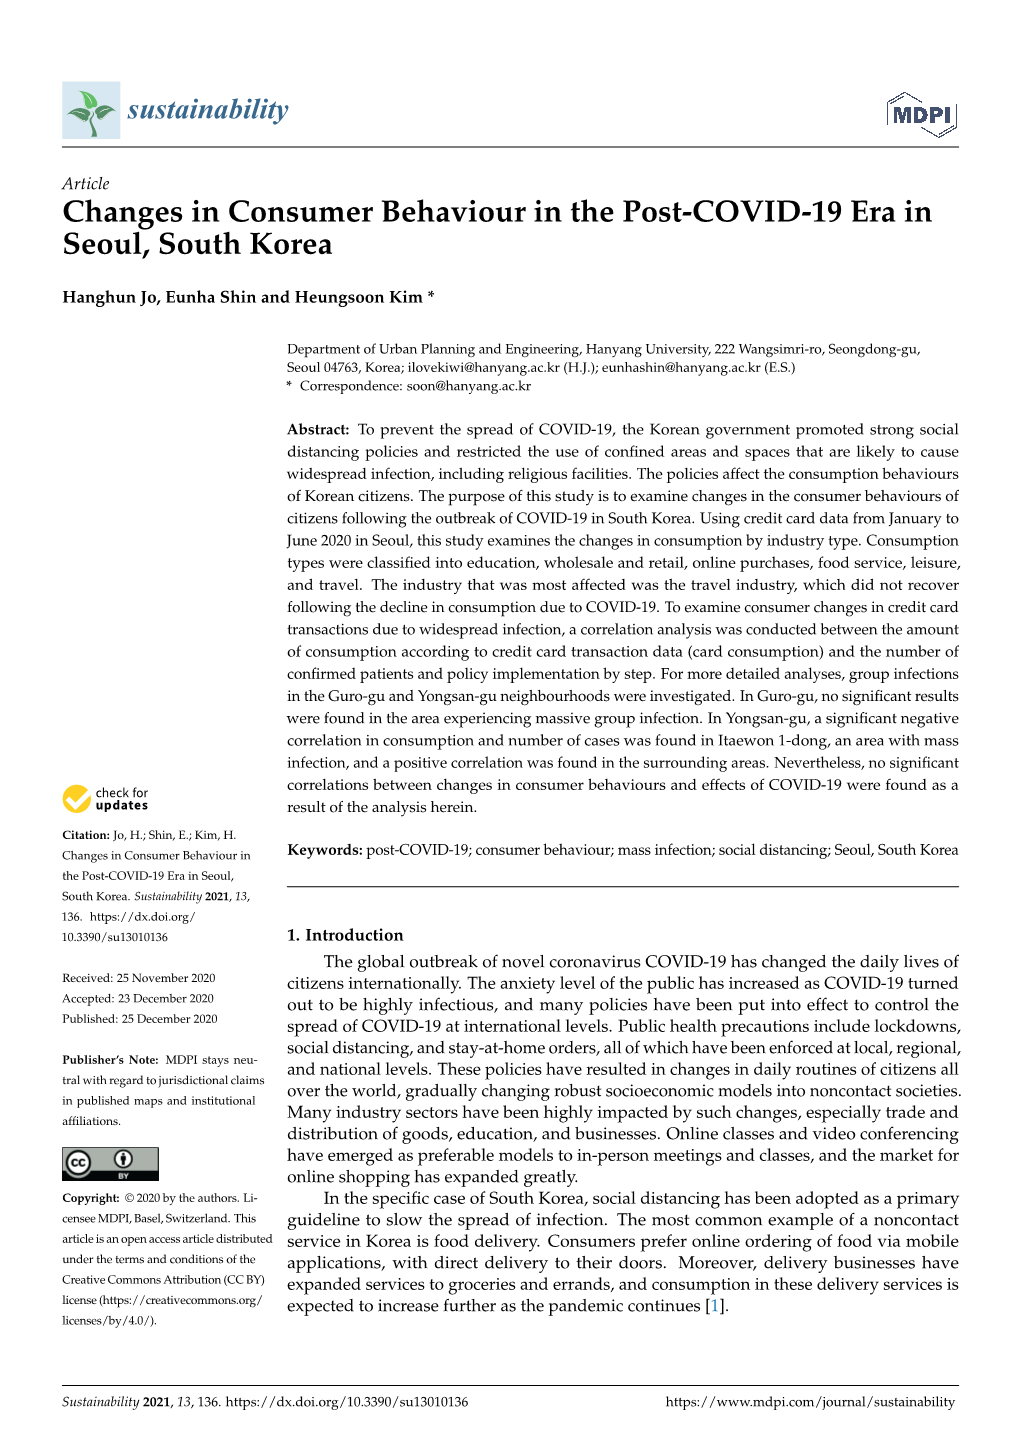 Changes in Consumer Behaviour in the Post-COVID-19 Era in Seoul, South Korea